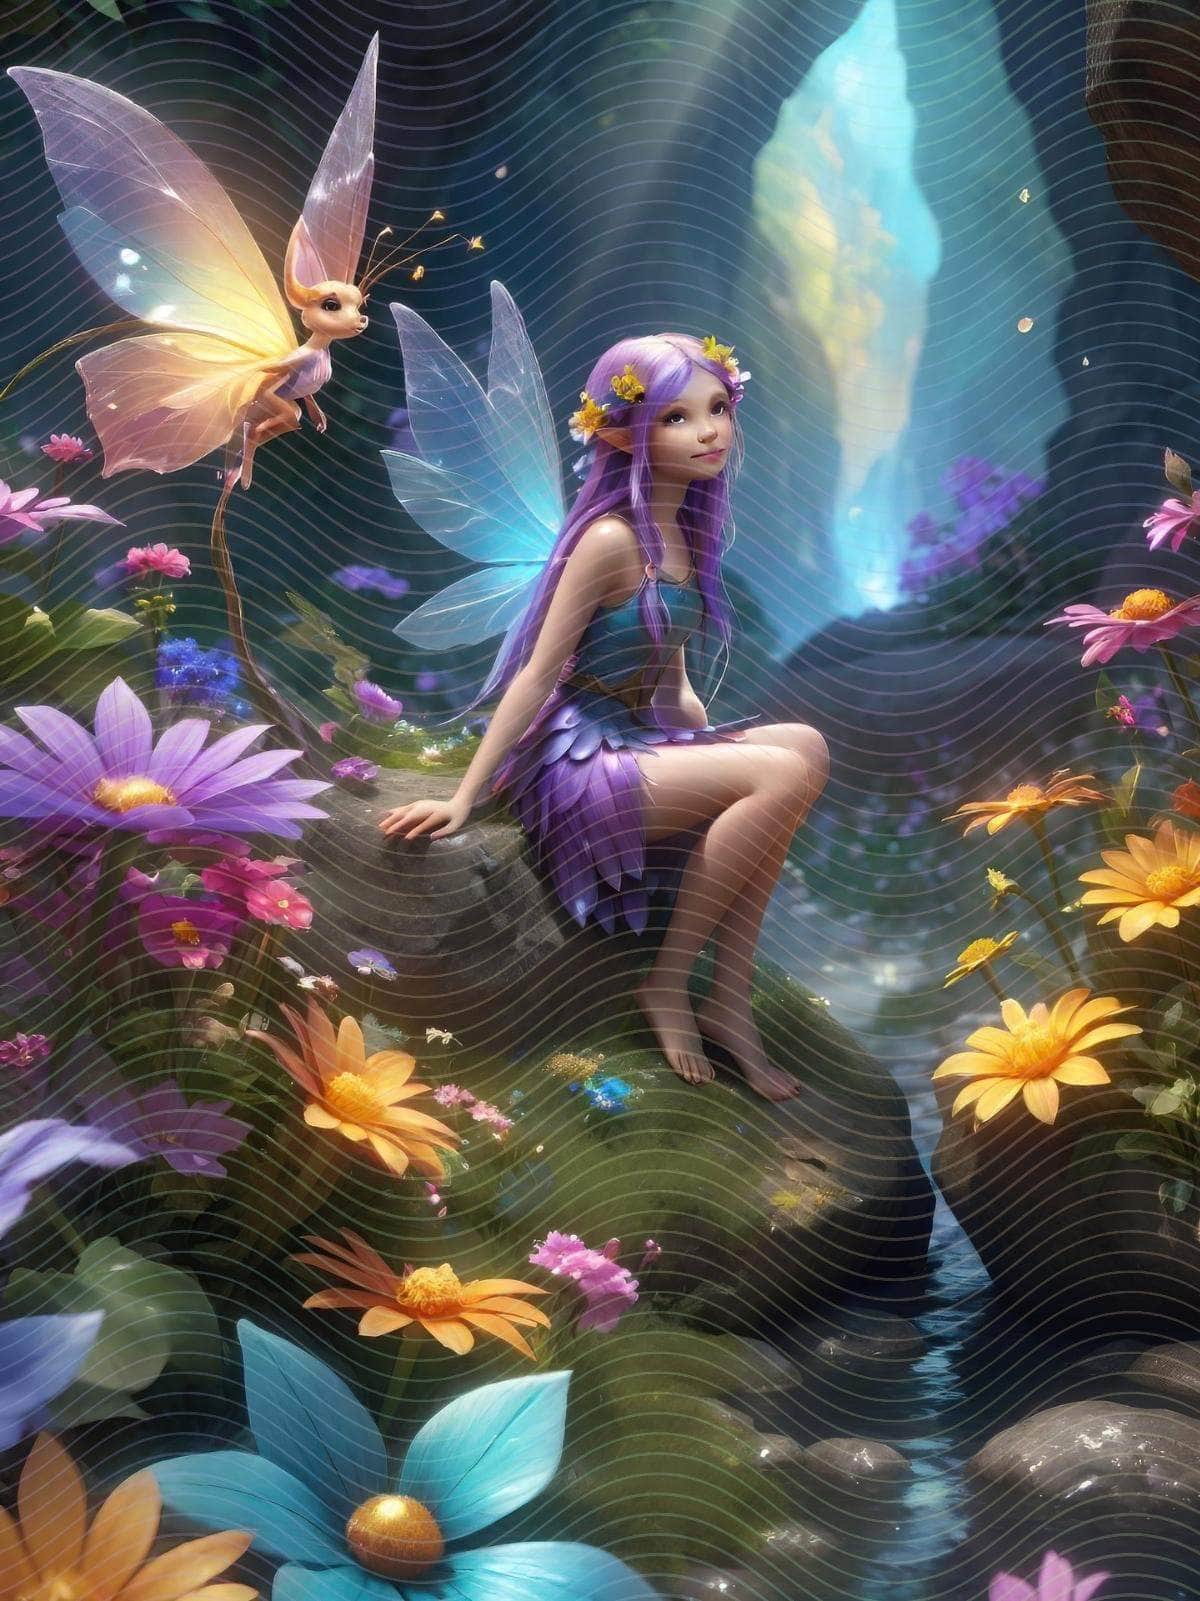 A Fairy Sitting on a Rock Surrounded by Flowers